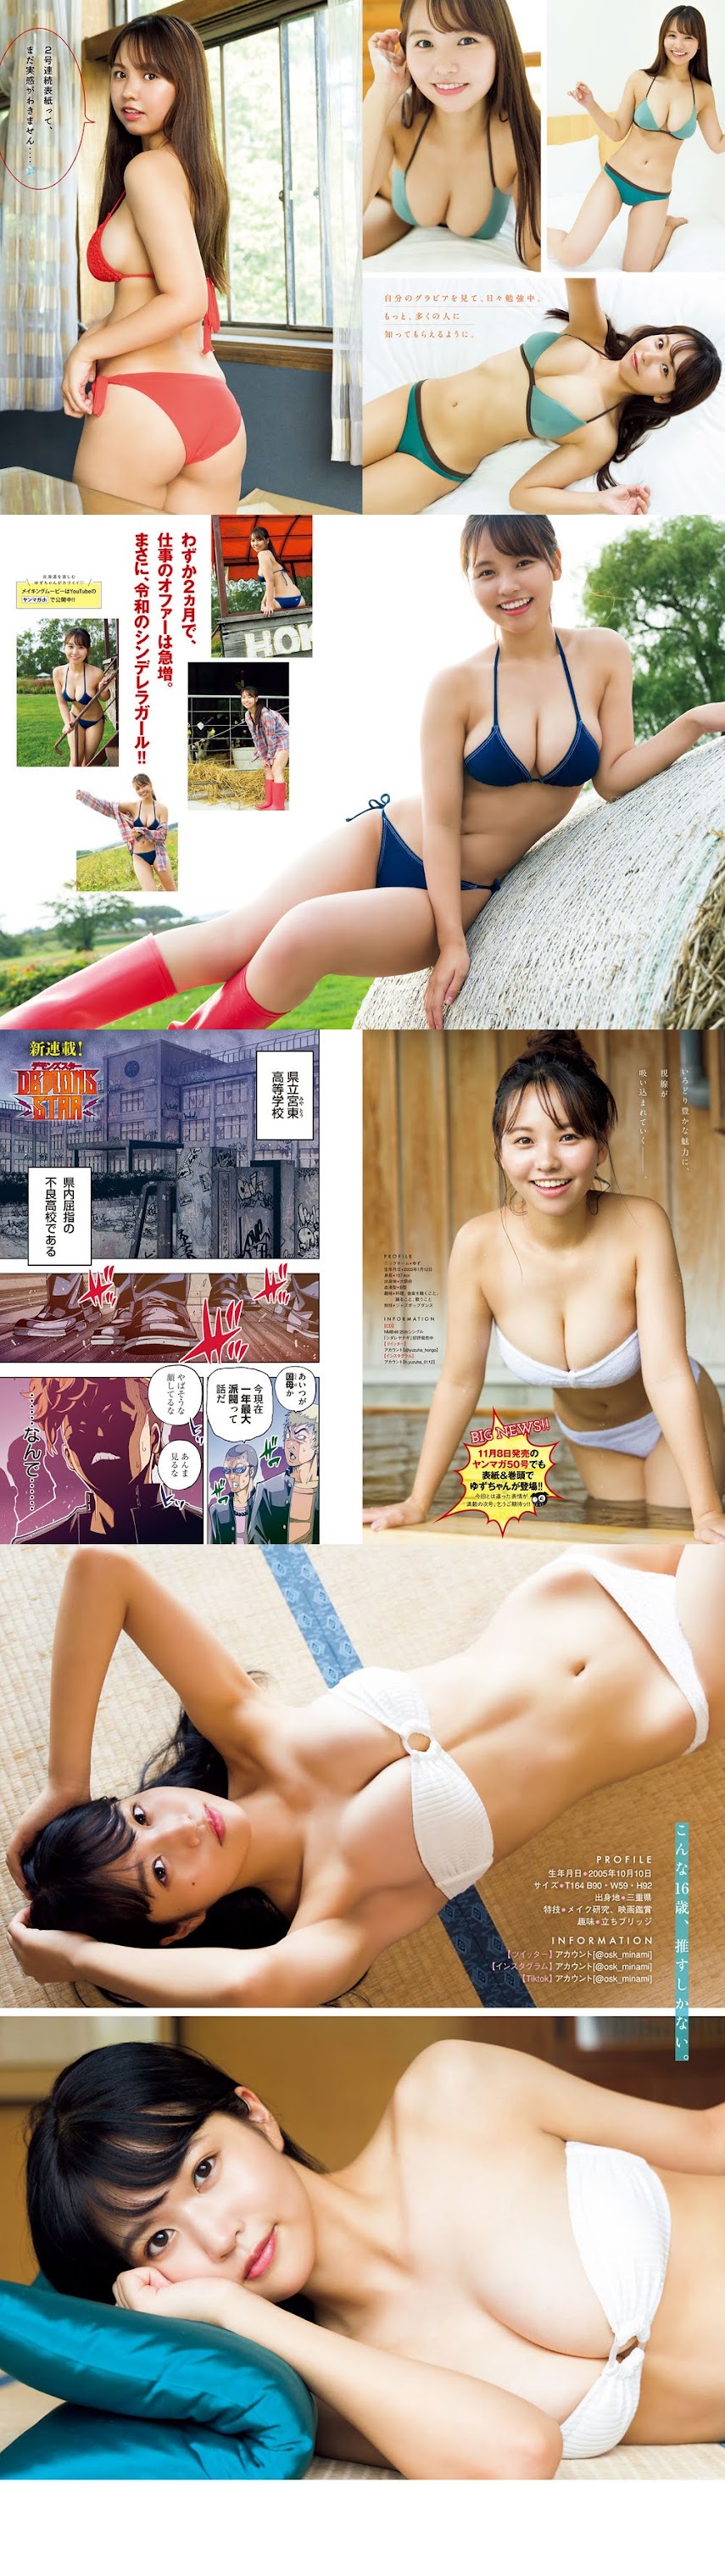 [Young Magazine] 2021 No.49 (本郷柚巴 南みゆか)   P214283 young-magazine 12190 